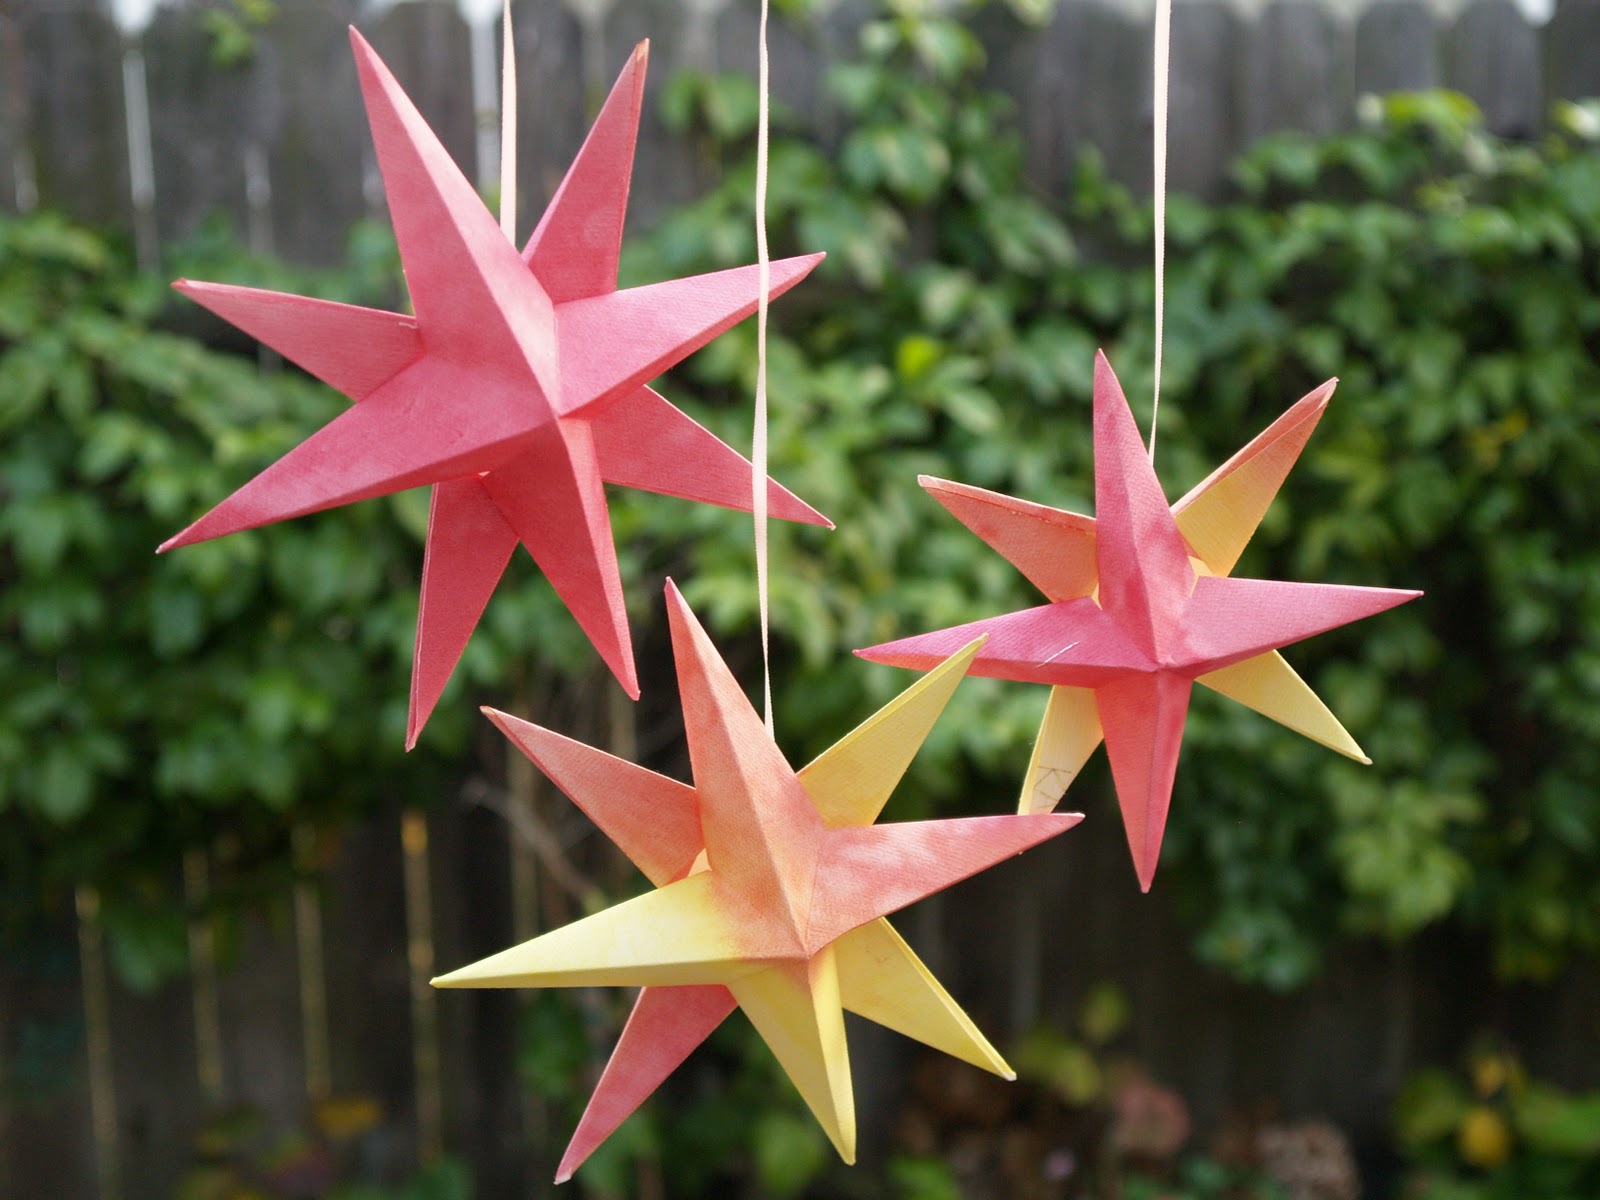 Folded Paper Christmas Origami Stars - The Magic Onions